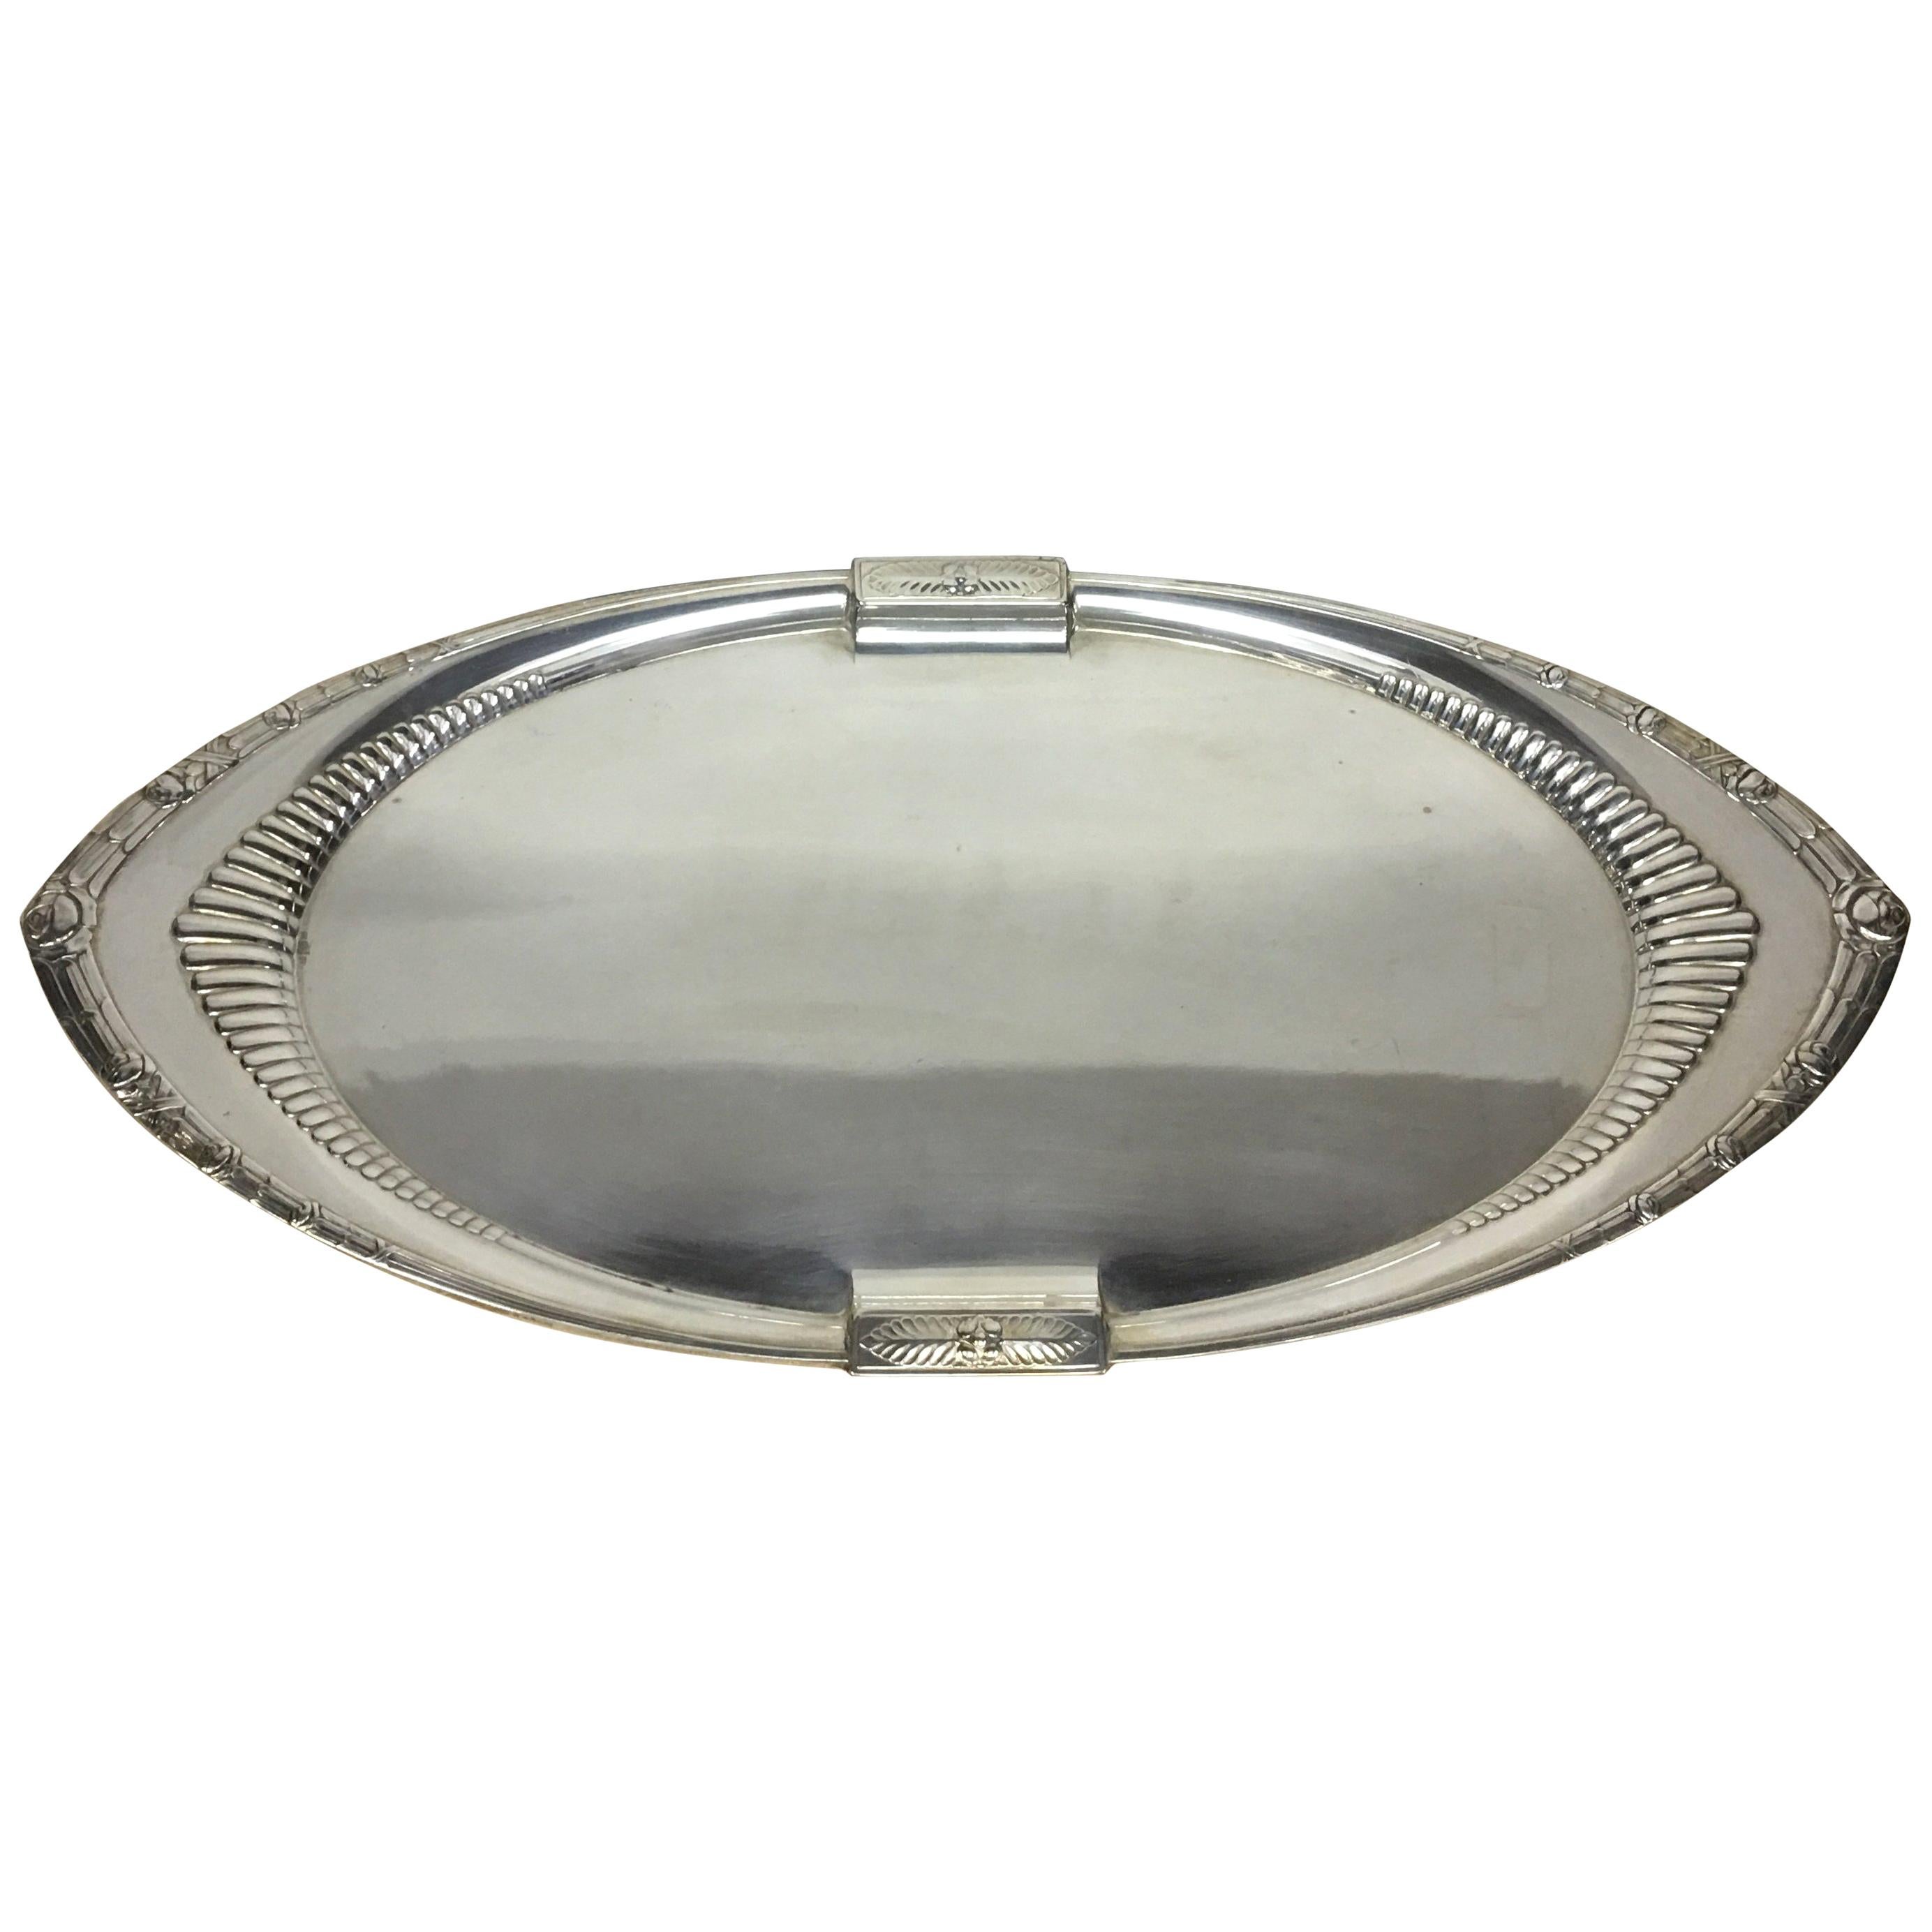 1930s W.M.F. Art Deco Silver Plated Oval Tray